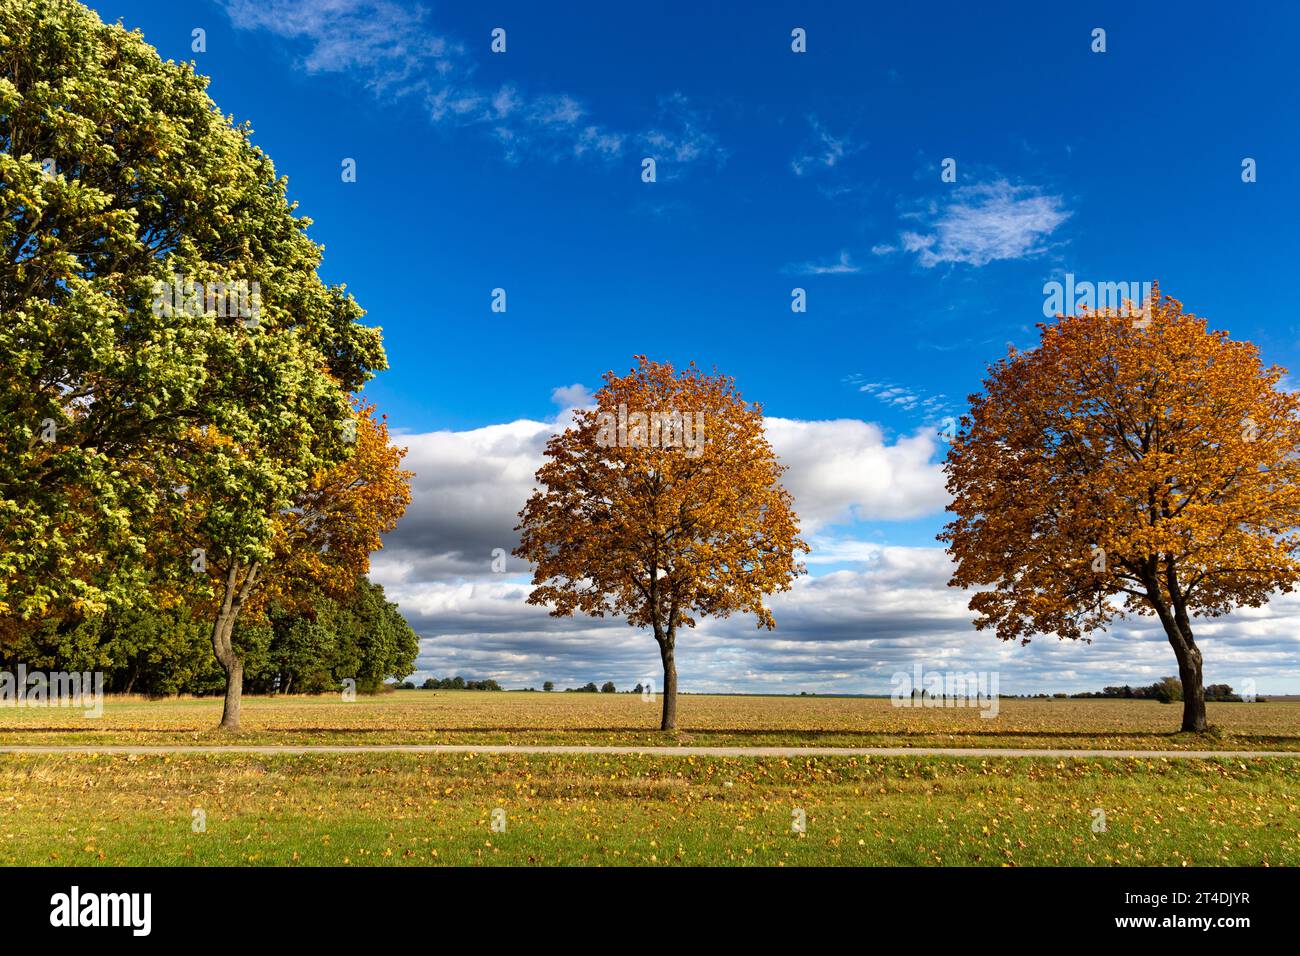 Autumn tree in a dry meadow over blue sky Stock Photo